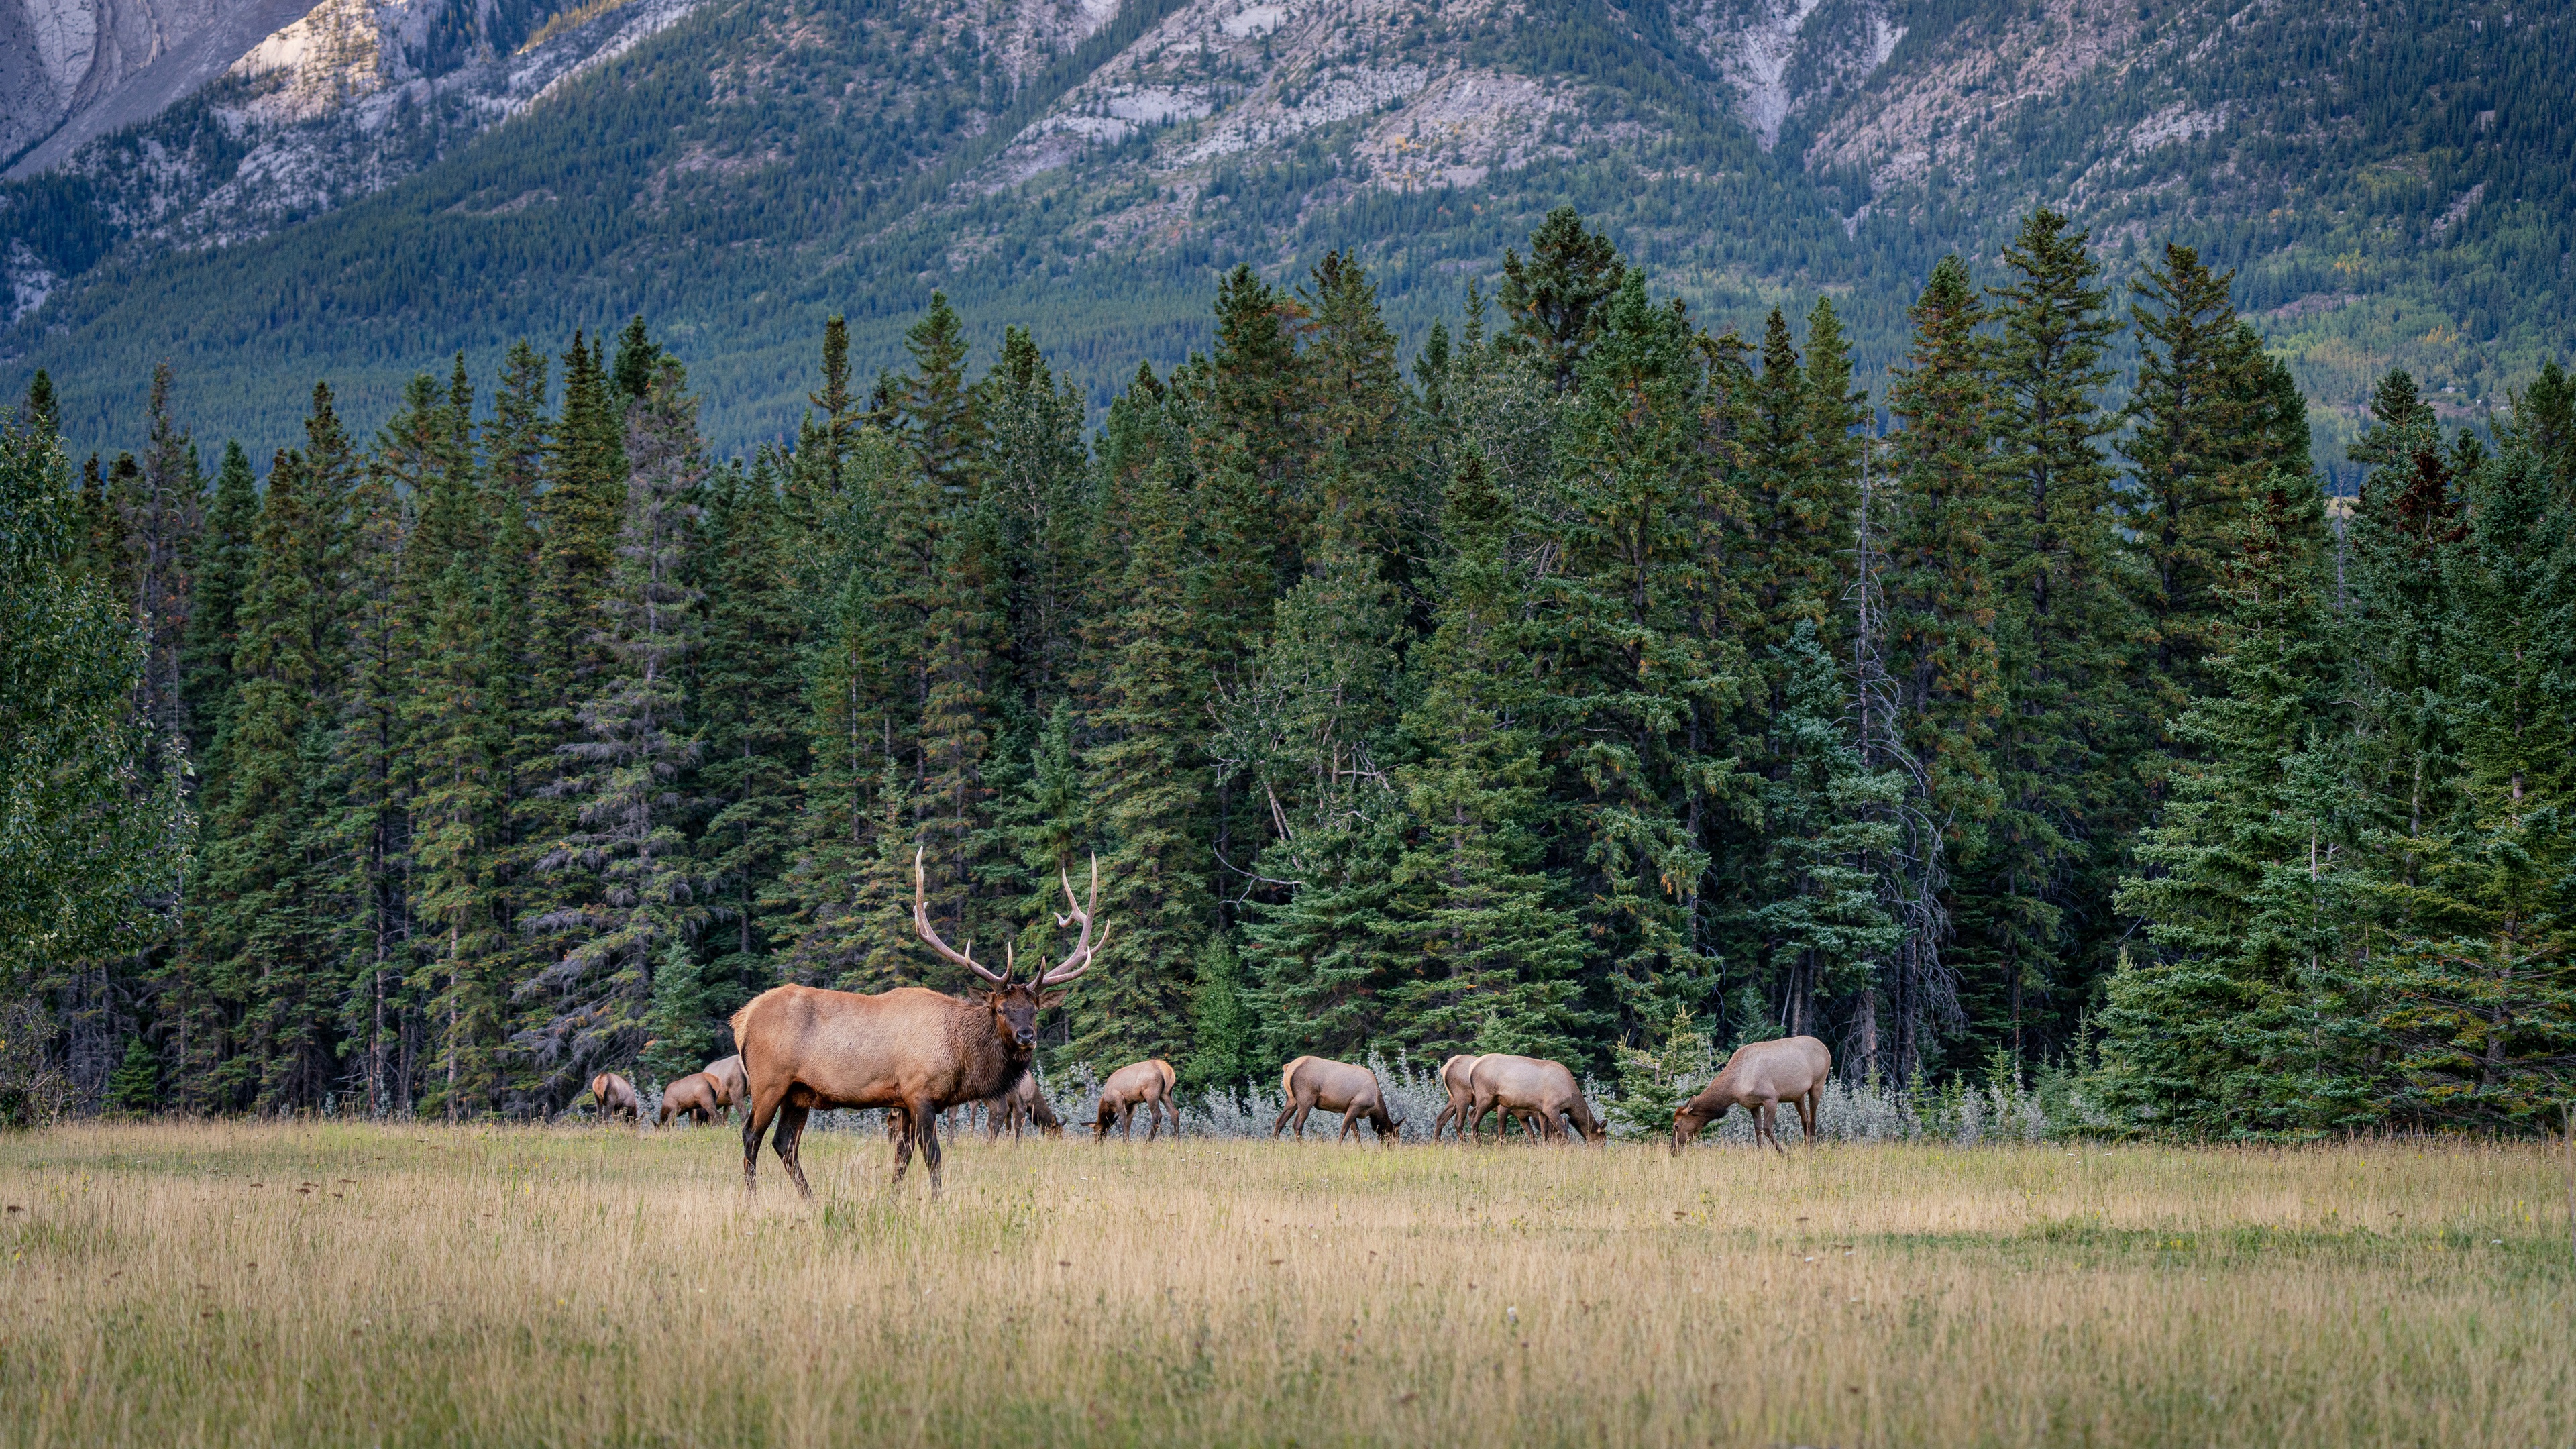 Free photo Deer walk in a field near a spruce forest near the mountains